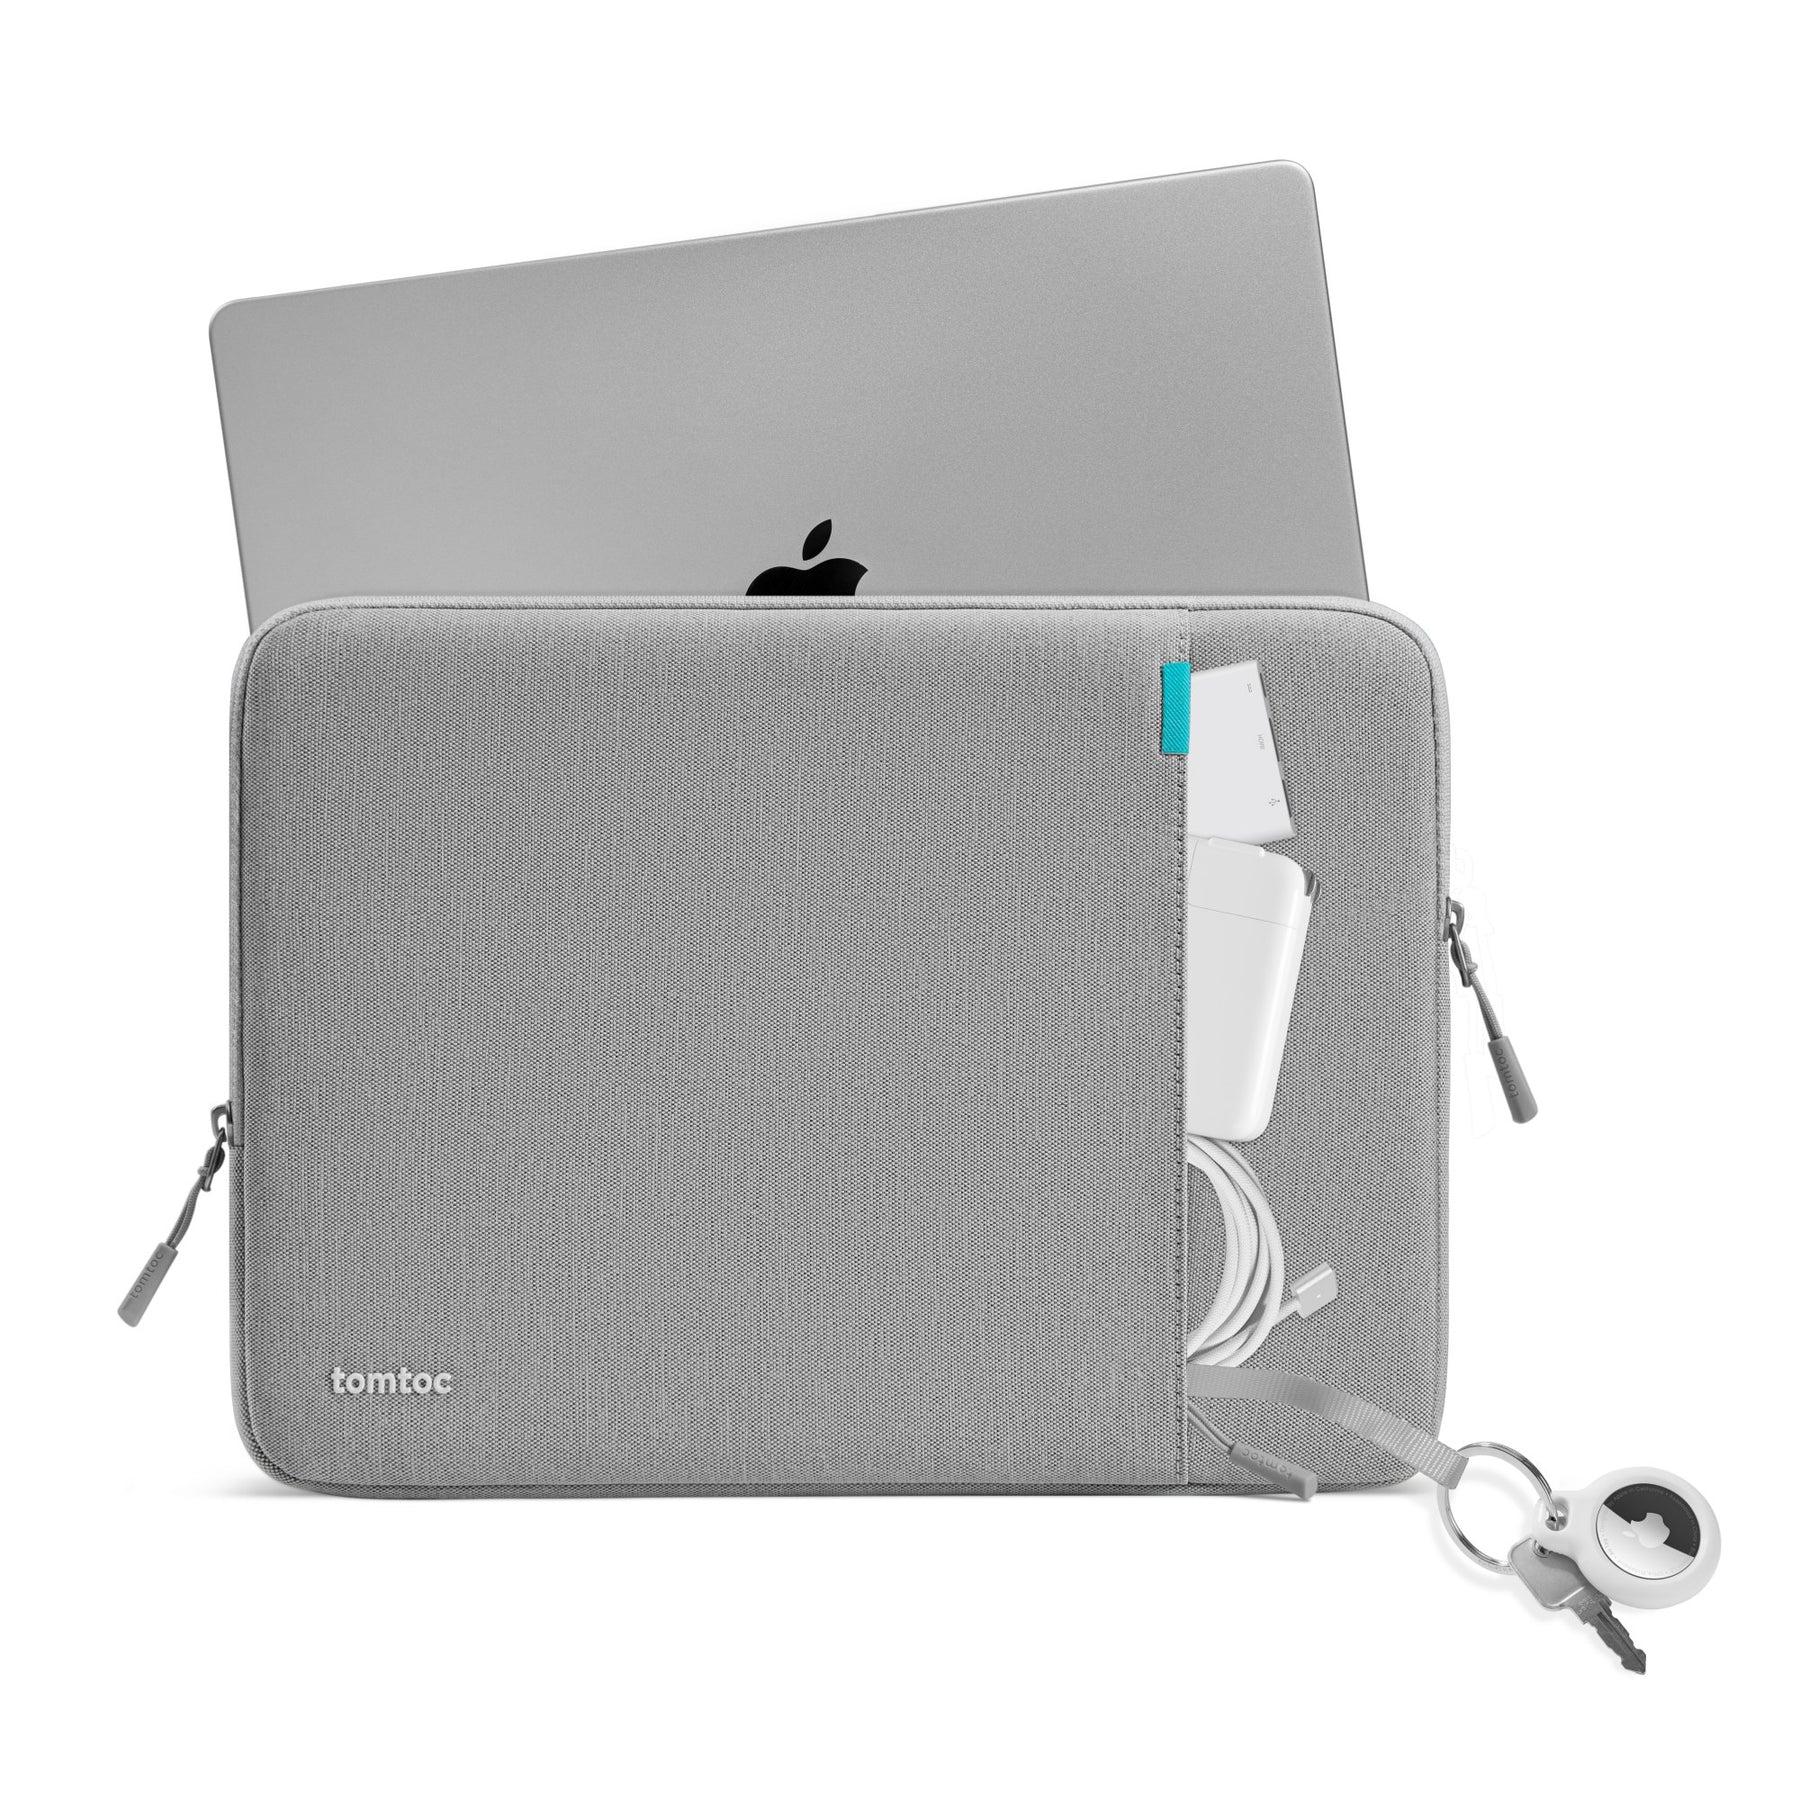 Defender-A13 Laptop Sleeve For 14 New MacBook Pro | Pink